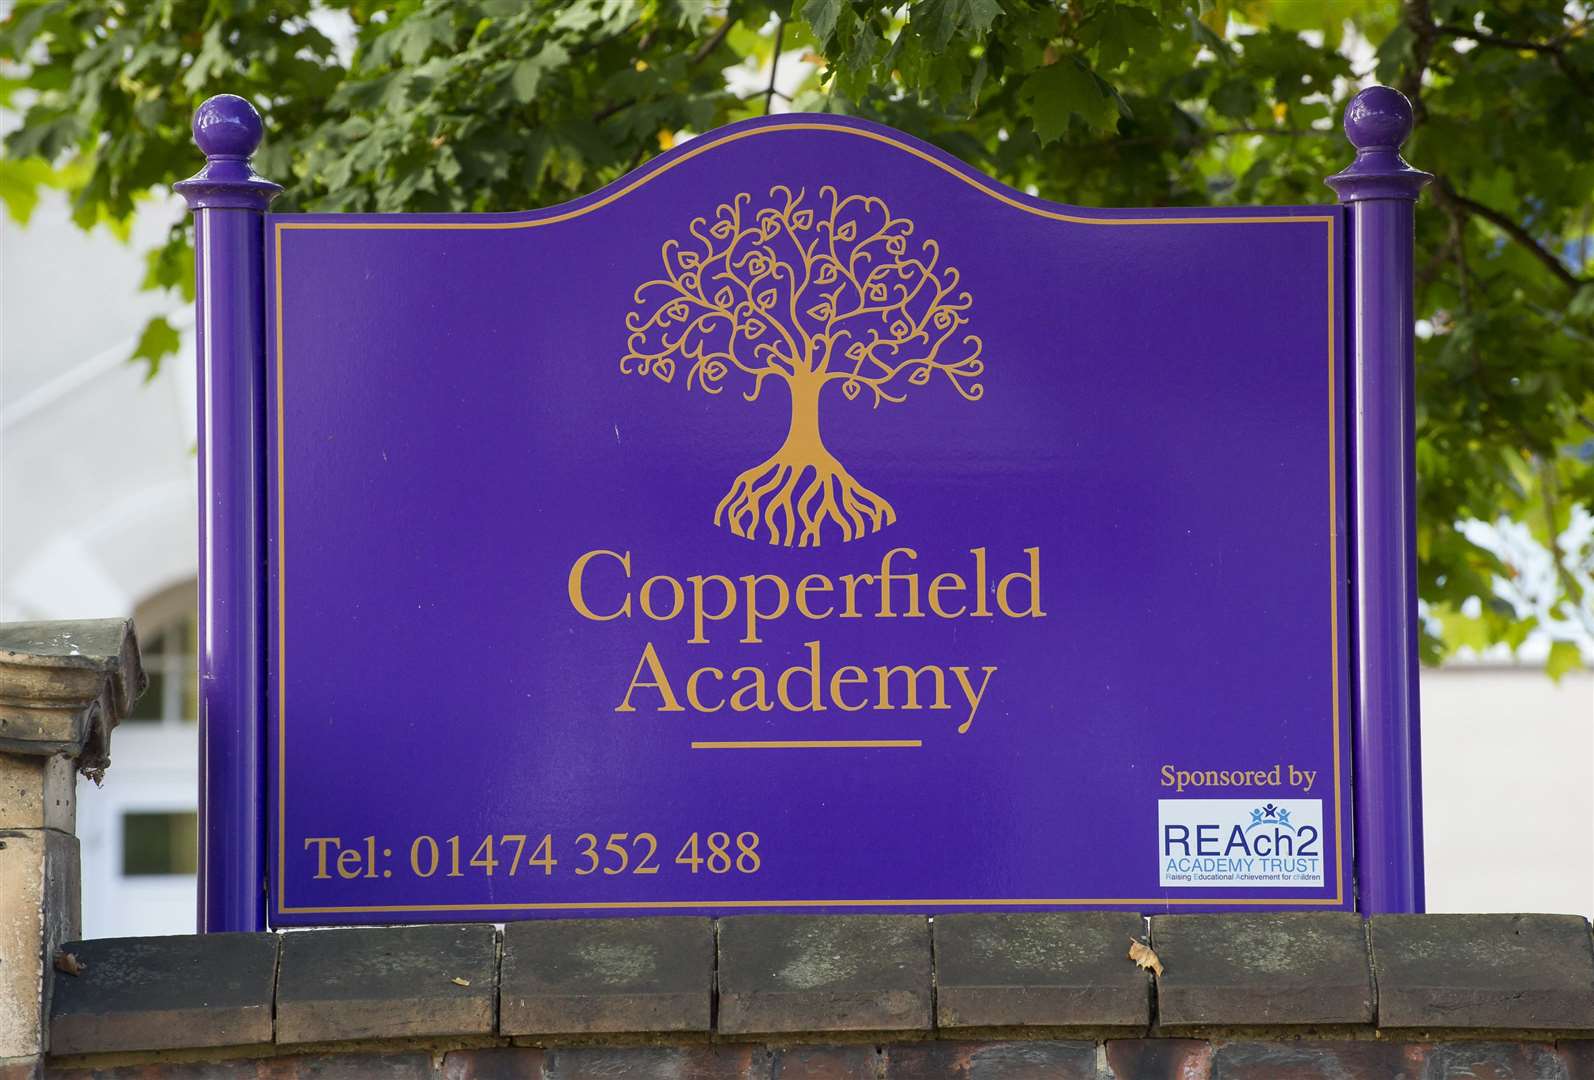 The school is part of the REAch2 Academy which also runs the Tymberwood Academy. Picture: Andy Payton